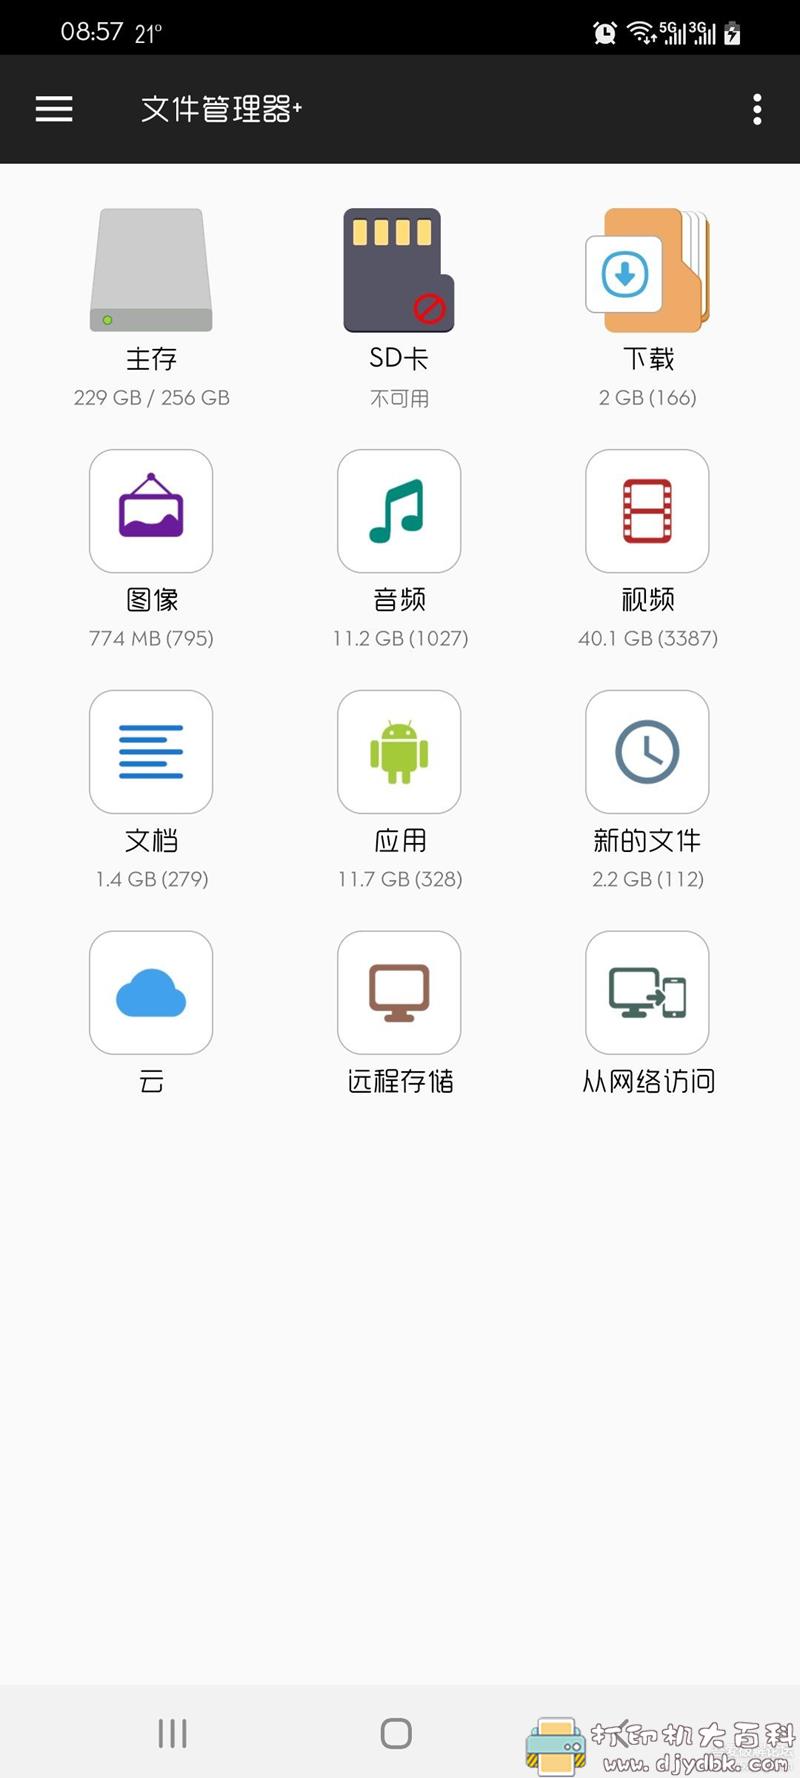 [Android]安卓文件管理器 File Manager Pro+ v2.6.3，比es文件浏览器好用 配图 No.2